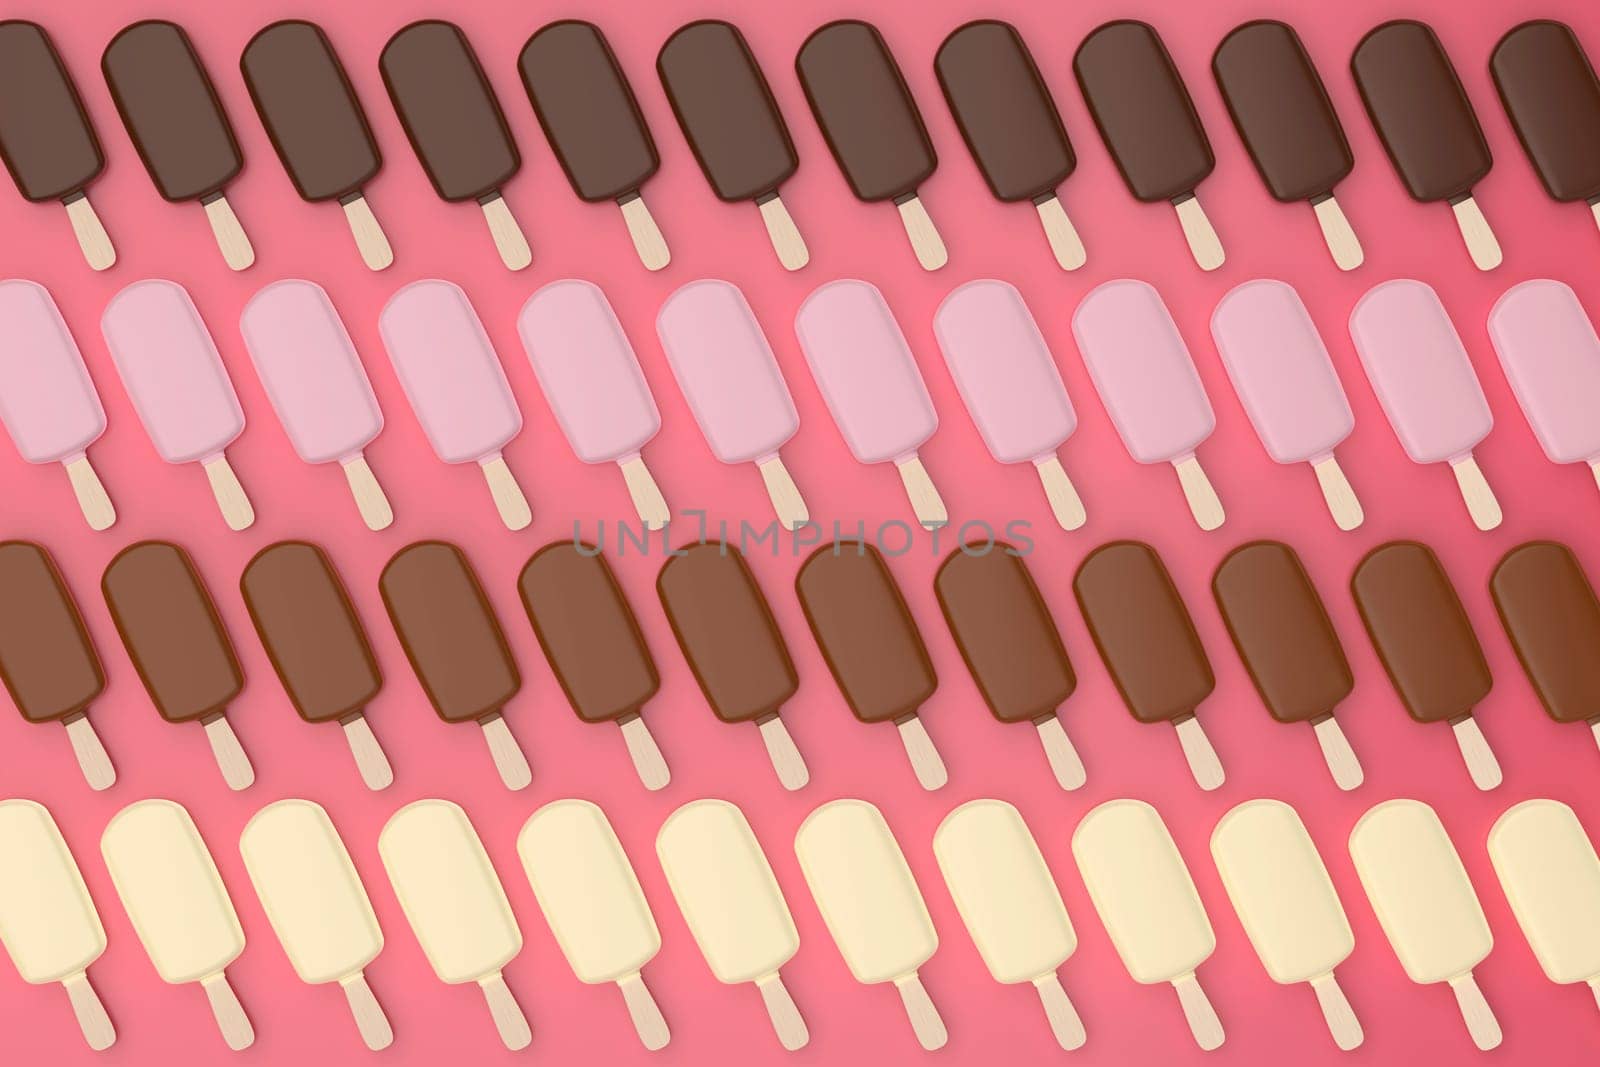 Many rows with different chocolate ice creams, top view